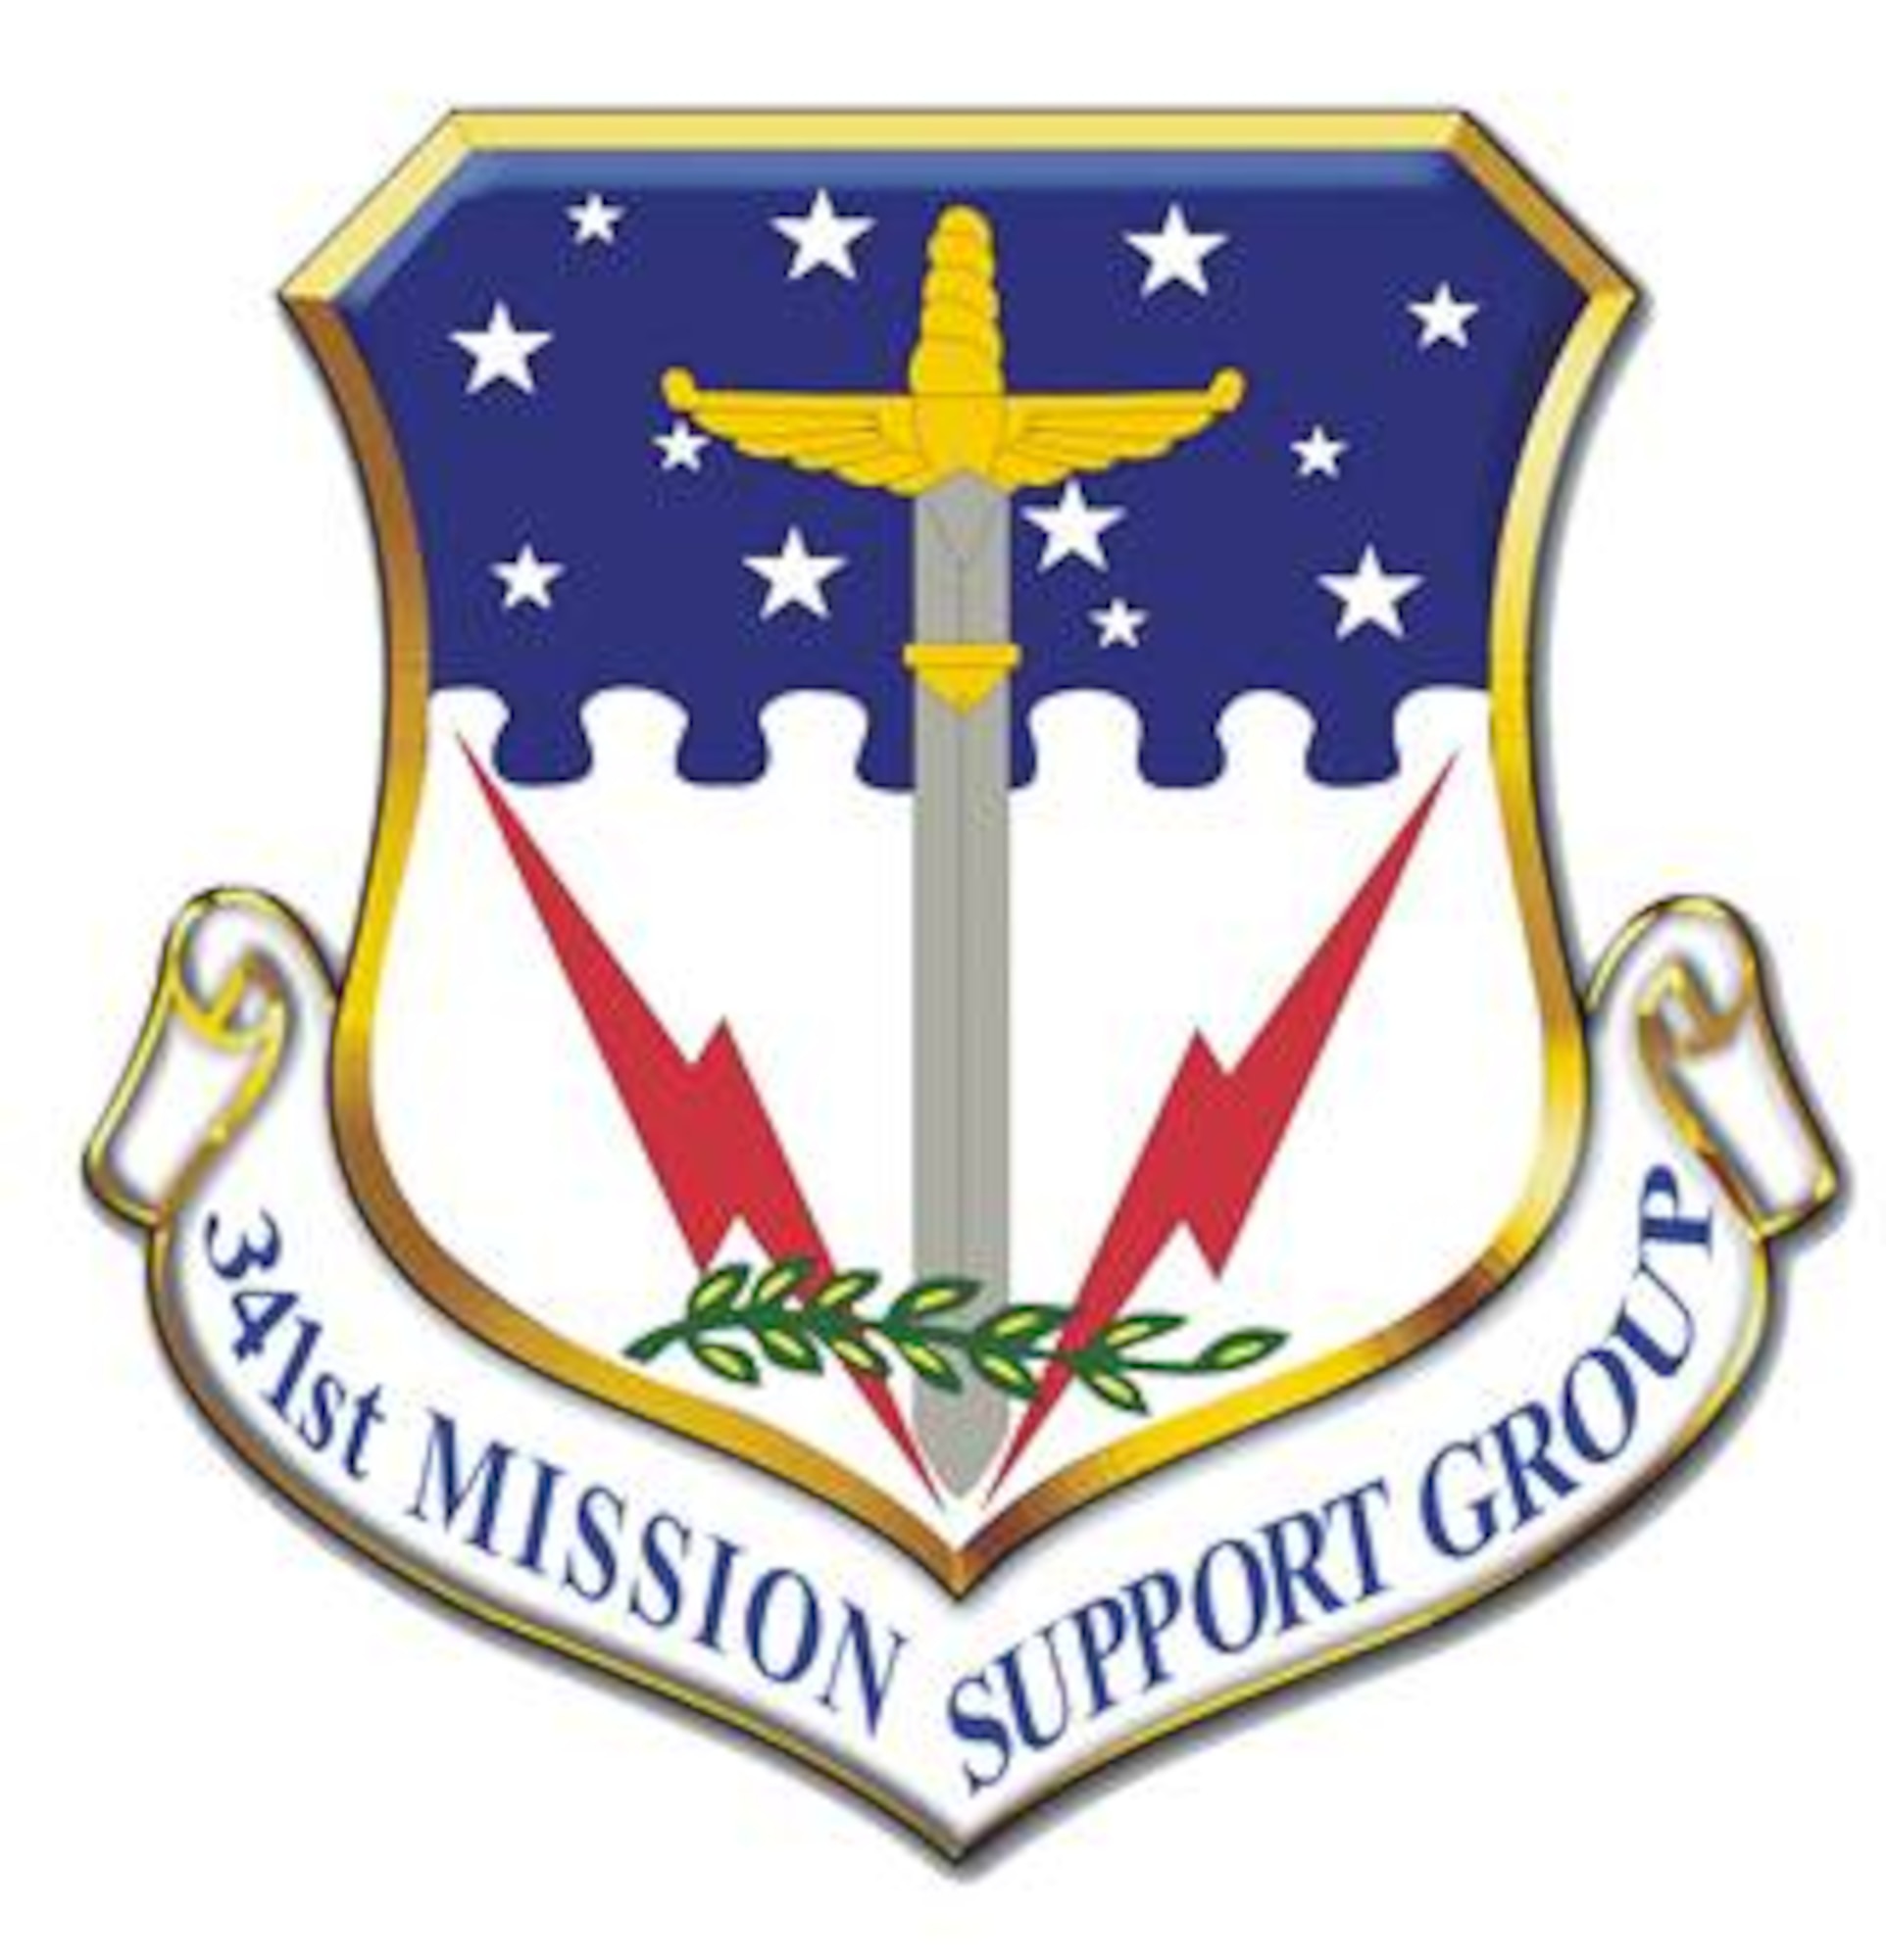 341st Mission Support Group shield